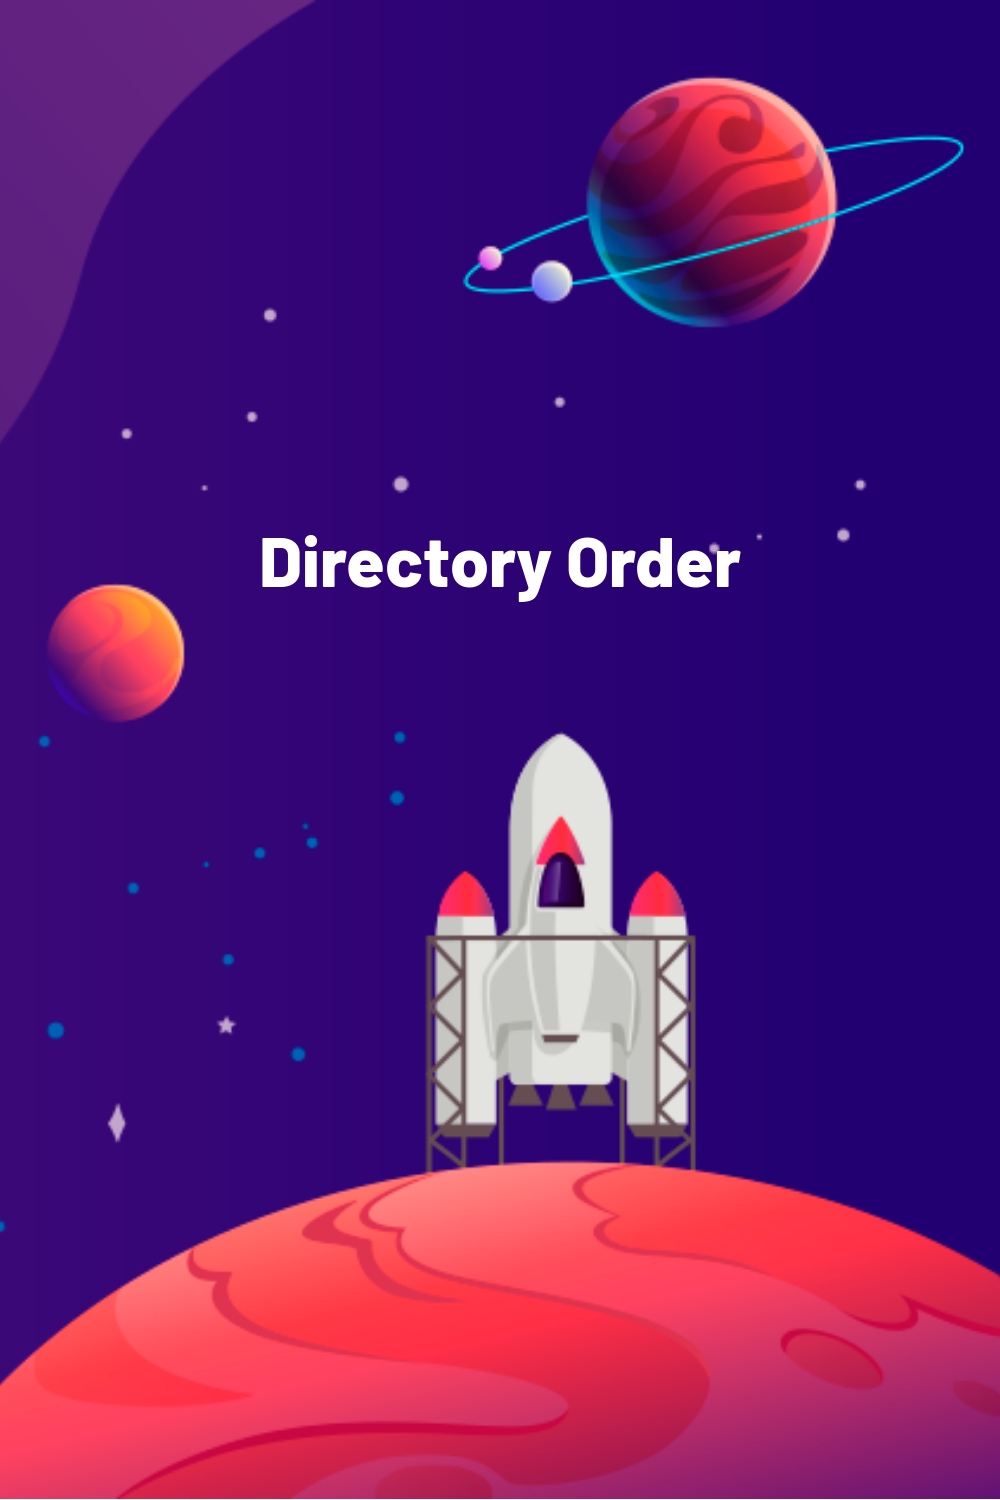 Directory Order